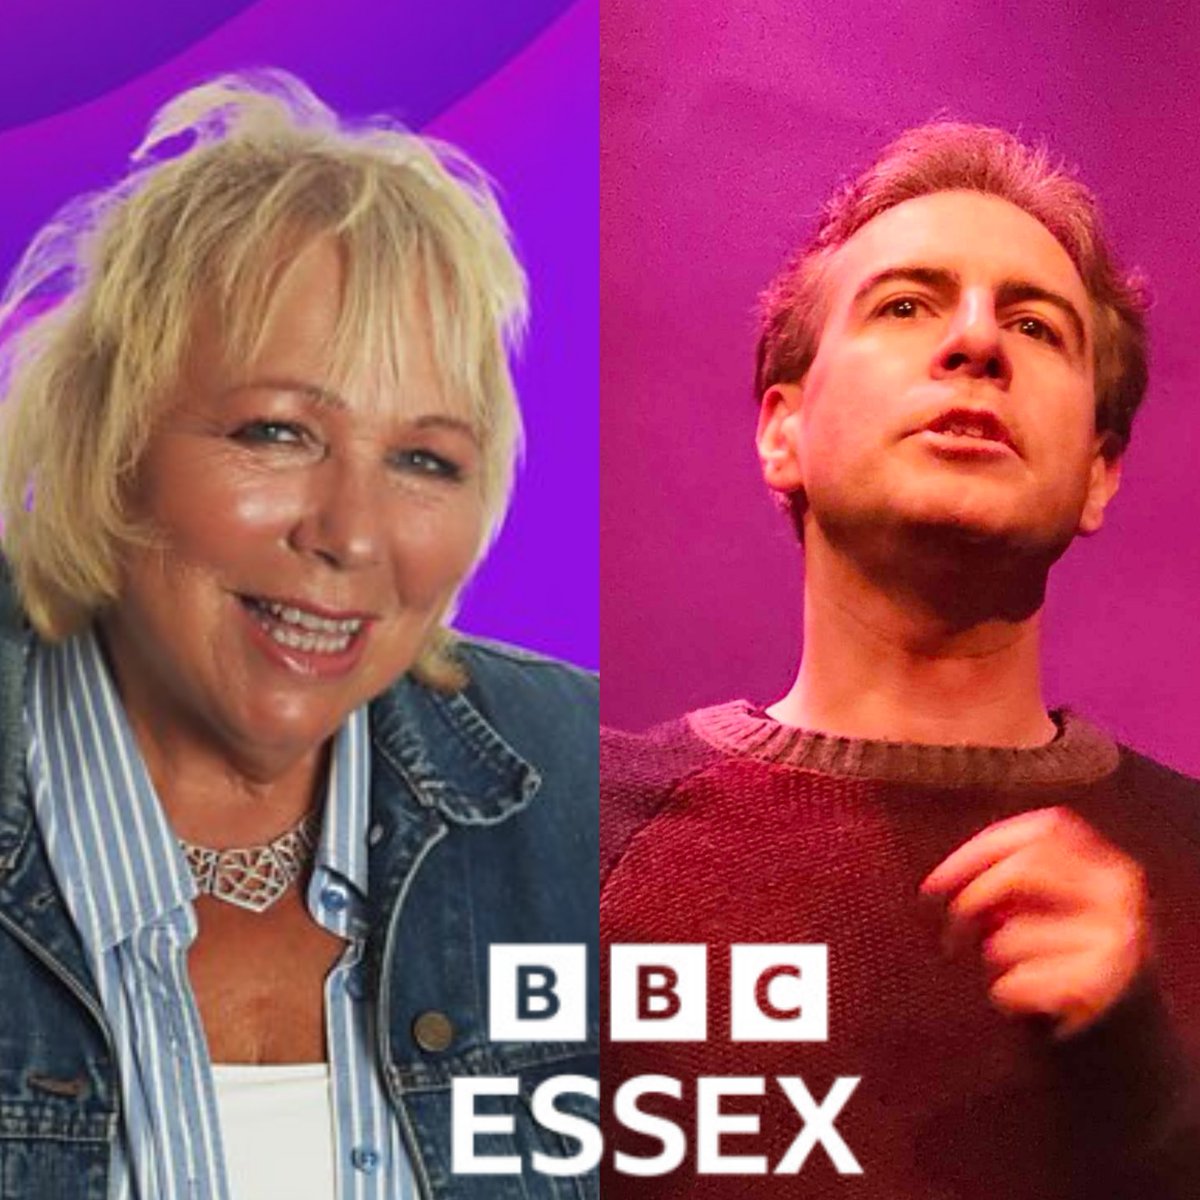 Had a very fun interview with @sadienine on @BBCEssex yesterday. Talking about “Howerd’s End” visiting The Brookside Theatre Romford and Chelmsford Theatre this spring / summer. Listen at 23 and 43 mins.
bbc.co.uk/sounds/play/p0…
#Theatre @BrooksideTh @ChelmsTheatre #HowerdsEnd